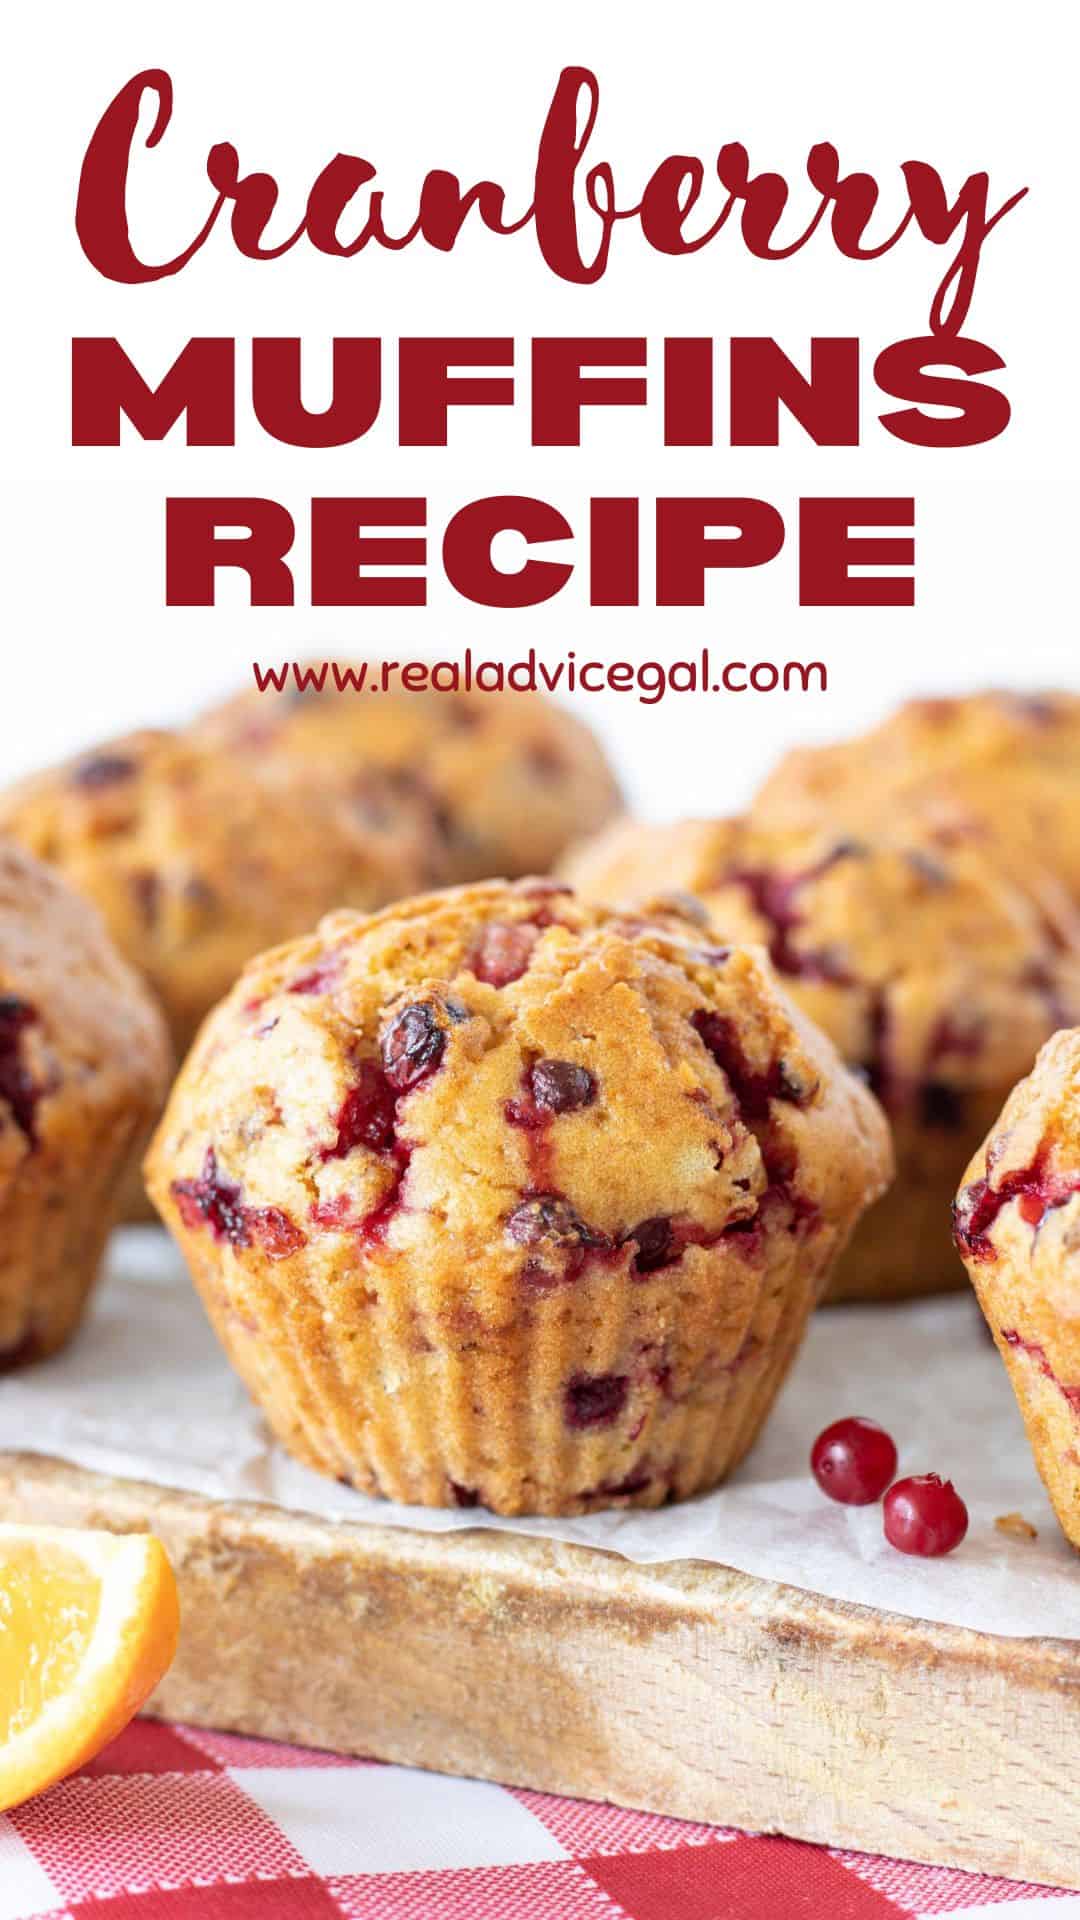 Recipe For Cranberry Muffins